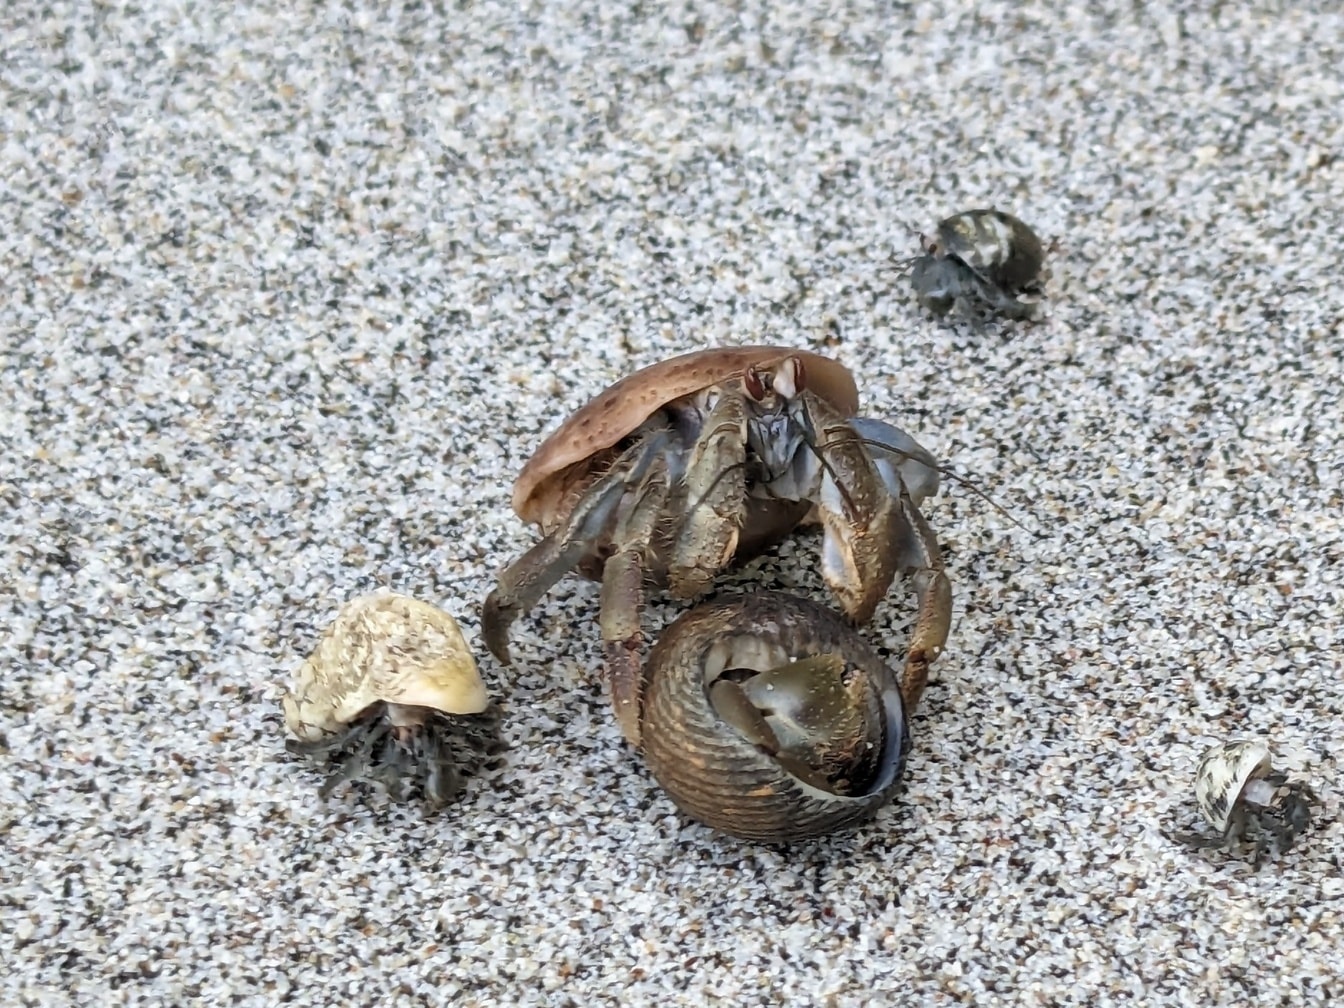 Caribbean hermit crab (Coenobita clypeatus) and a shell on the sand